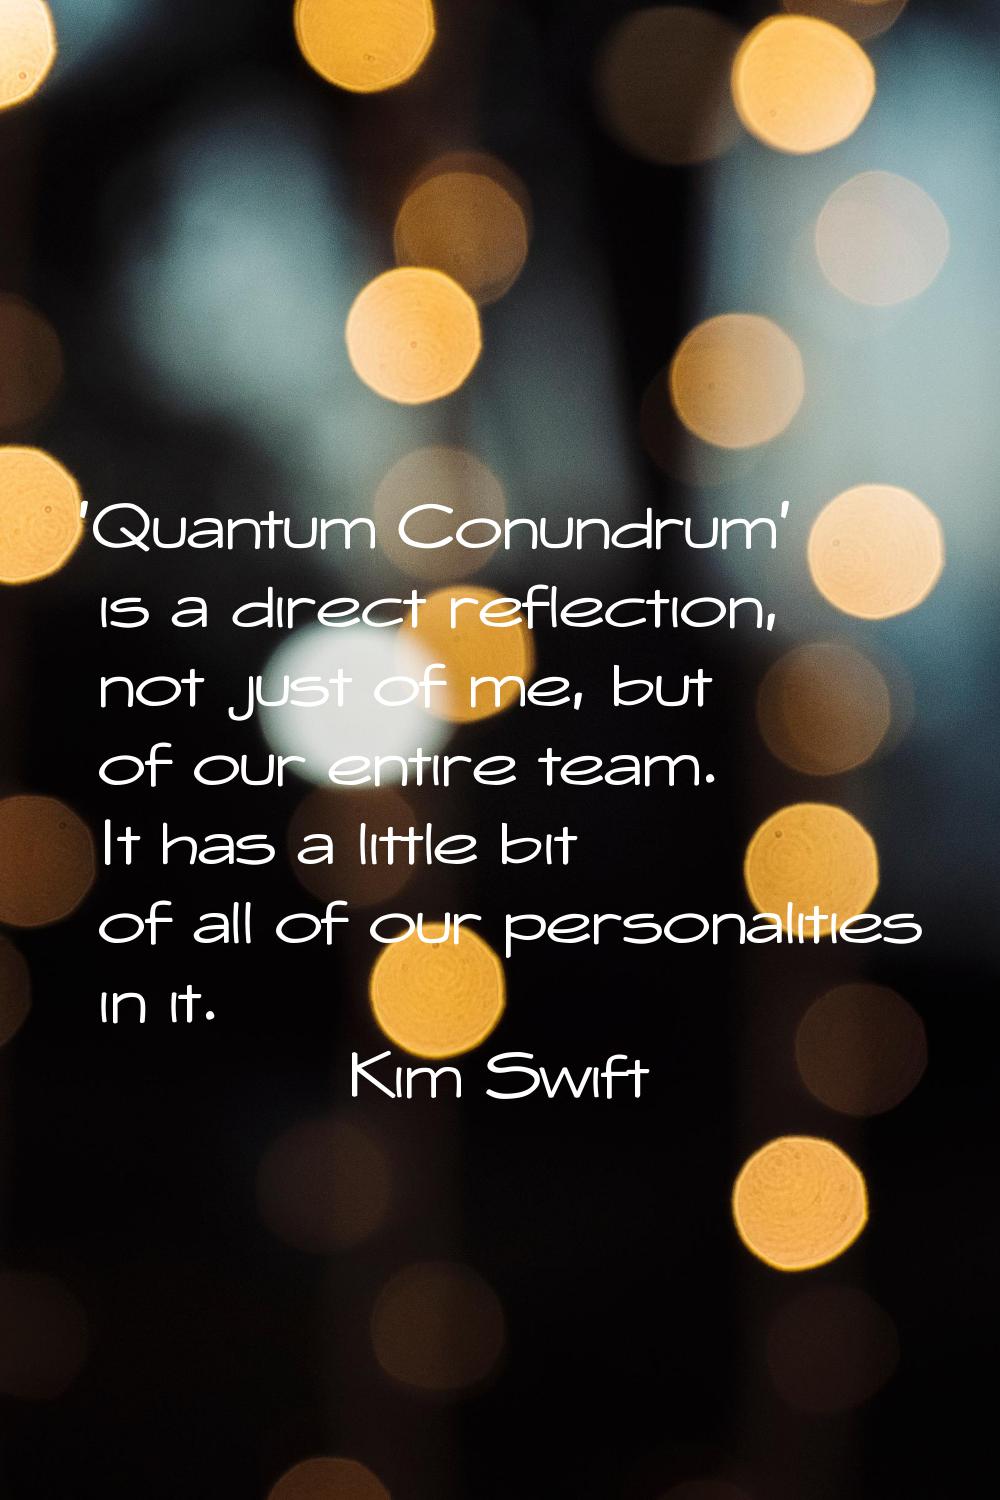 'Quantum Conundrum' is a direct reflection, not just of me, but of our entire team. It has a little